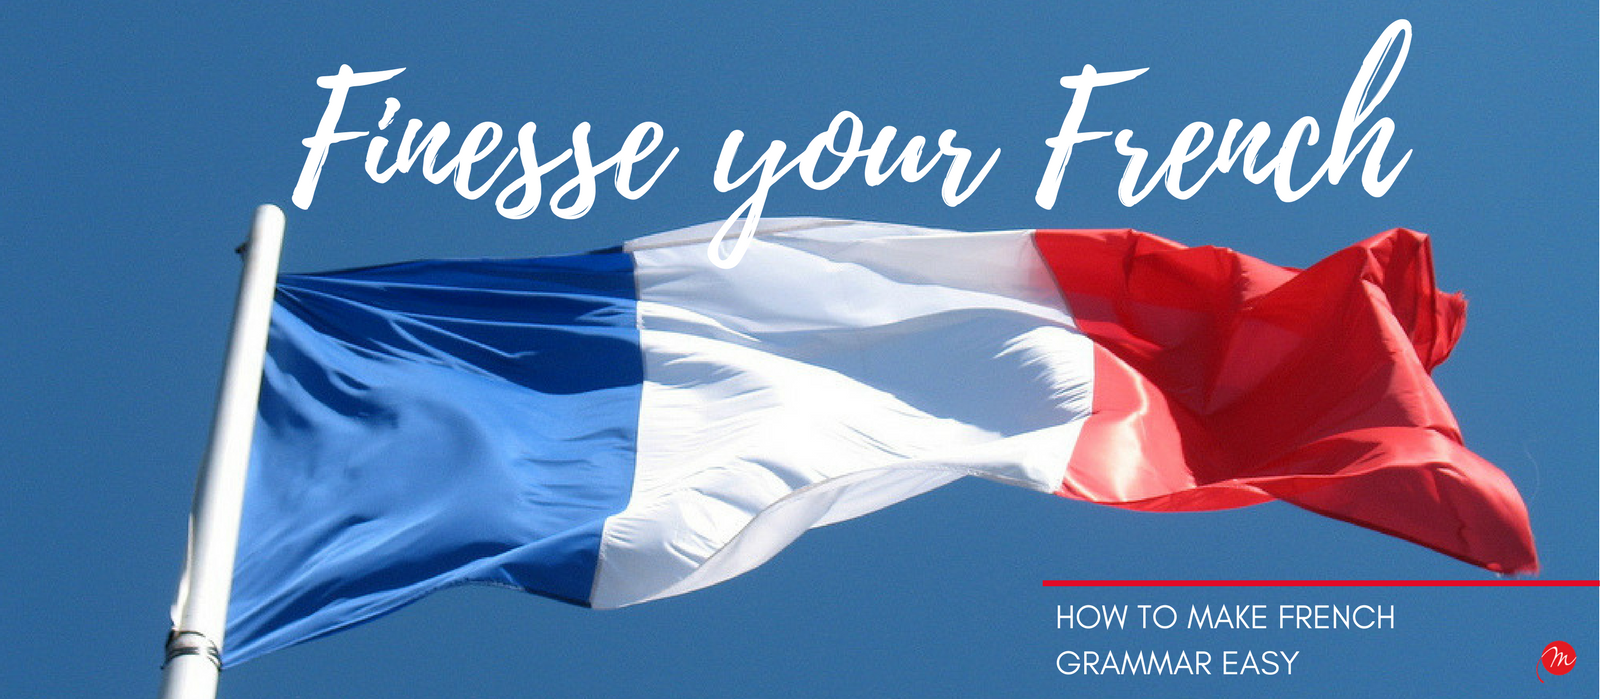 MyFrenchLife™ – MyFrenchLife.org - French grammar easy - How to make French grammar easy - finesse your French - Learn French - French language learning - Flag